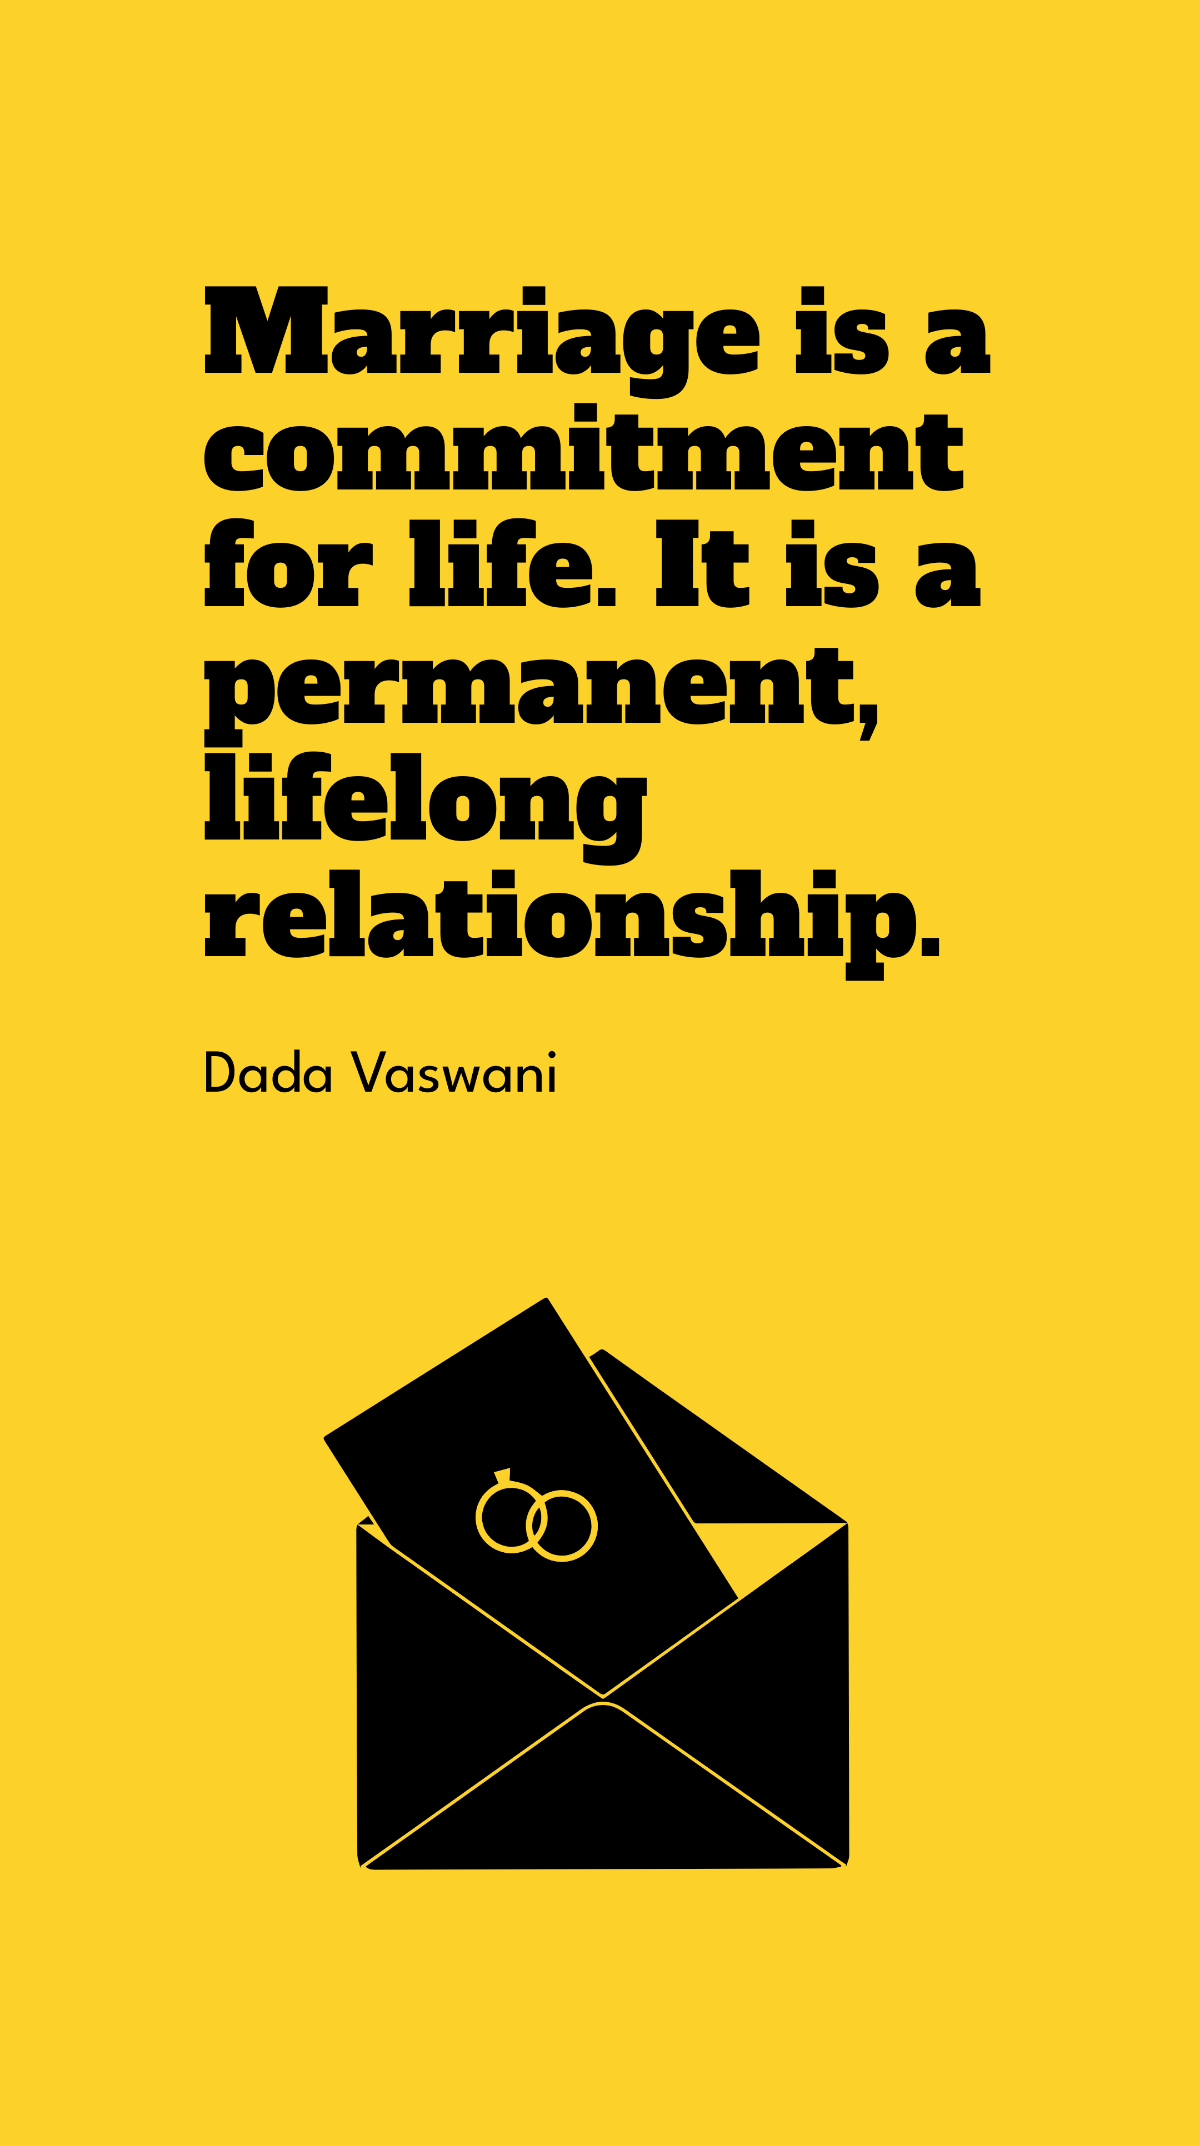 Dada Vaswani - Marriage is a commitment for life. It is a permanent, lifelong relationship. Template